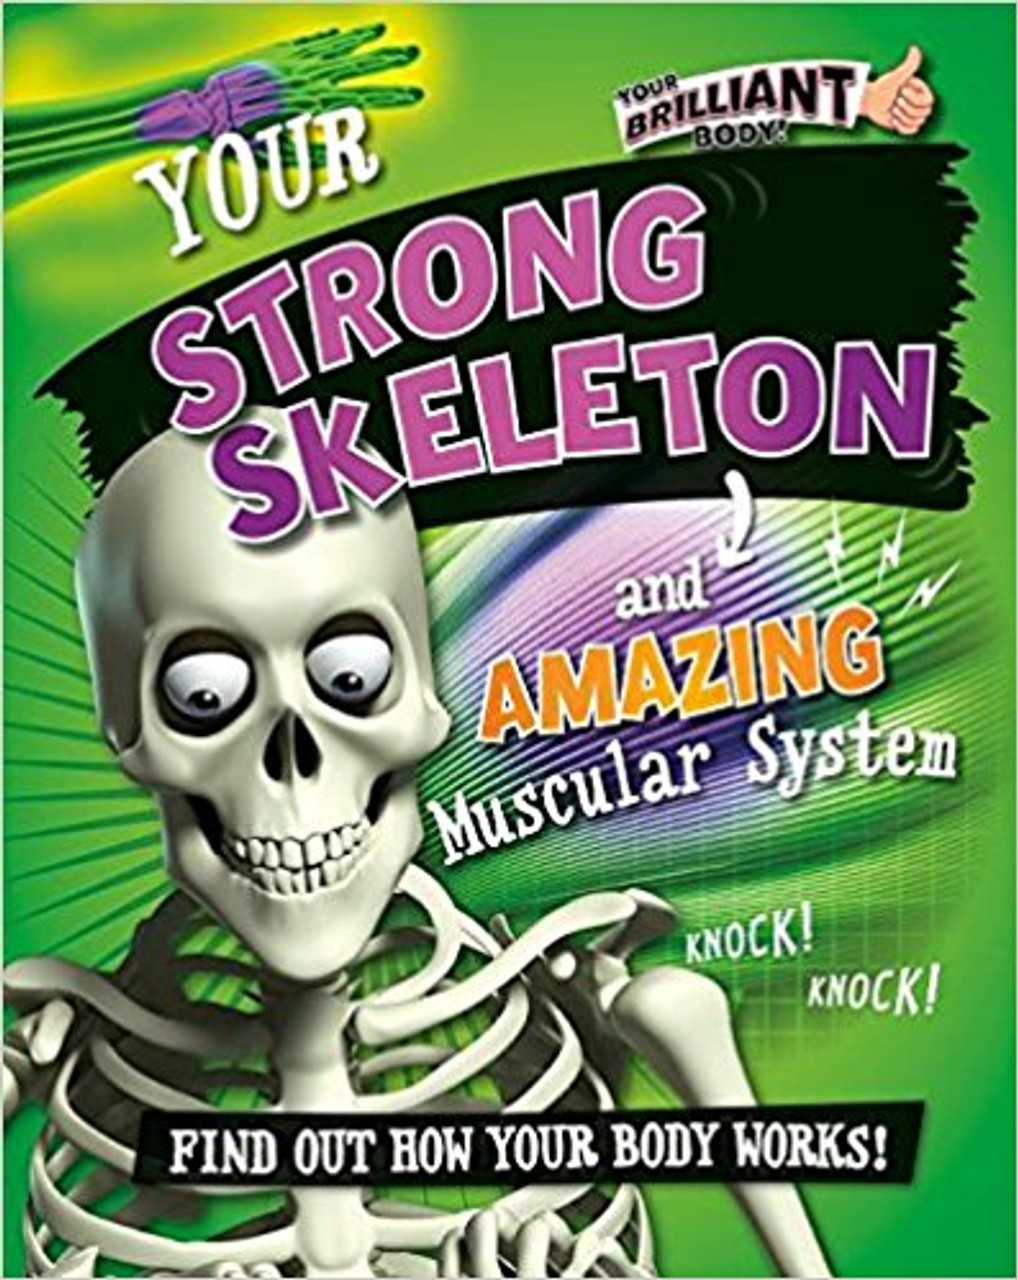 Your Strong Skeleton and Amazing Muscular System by Paul Mason